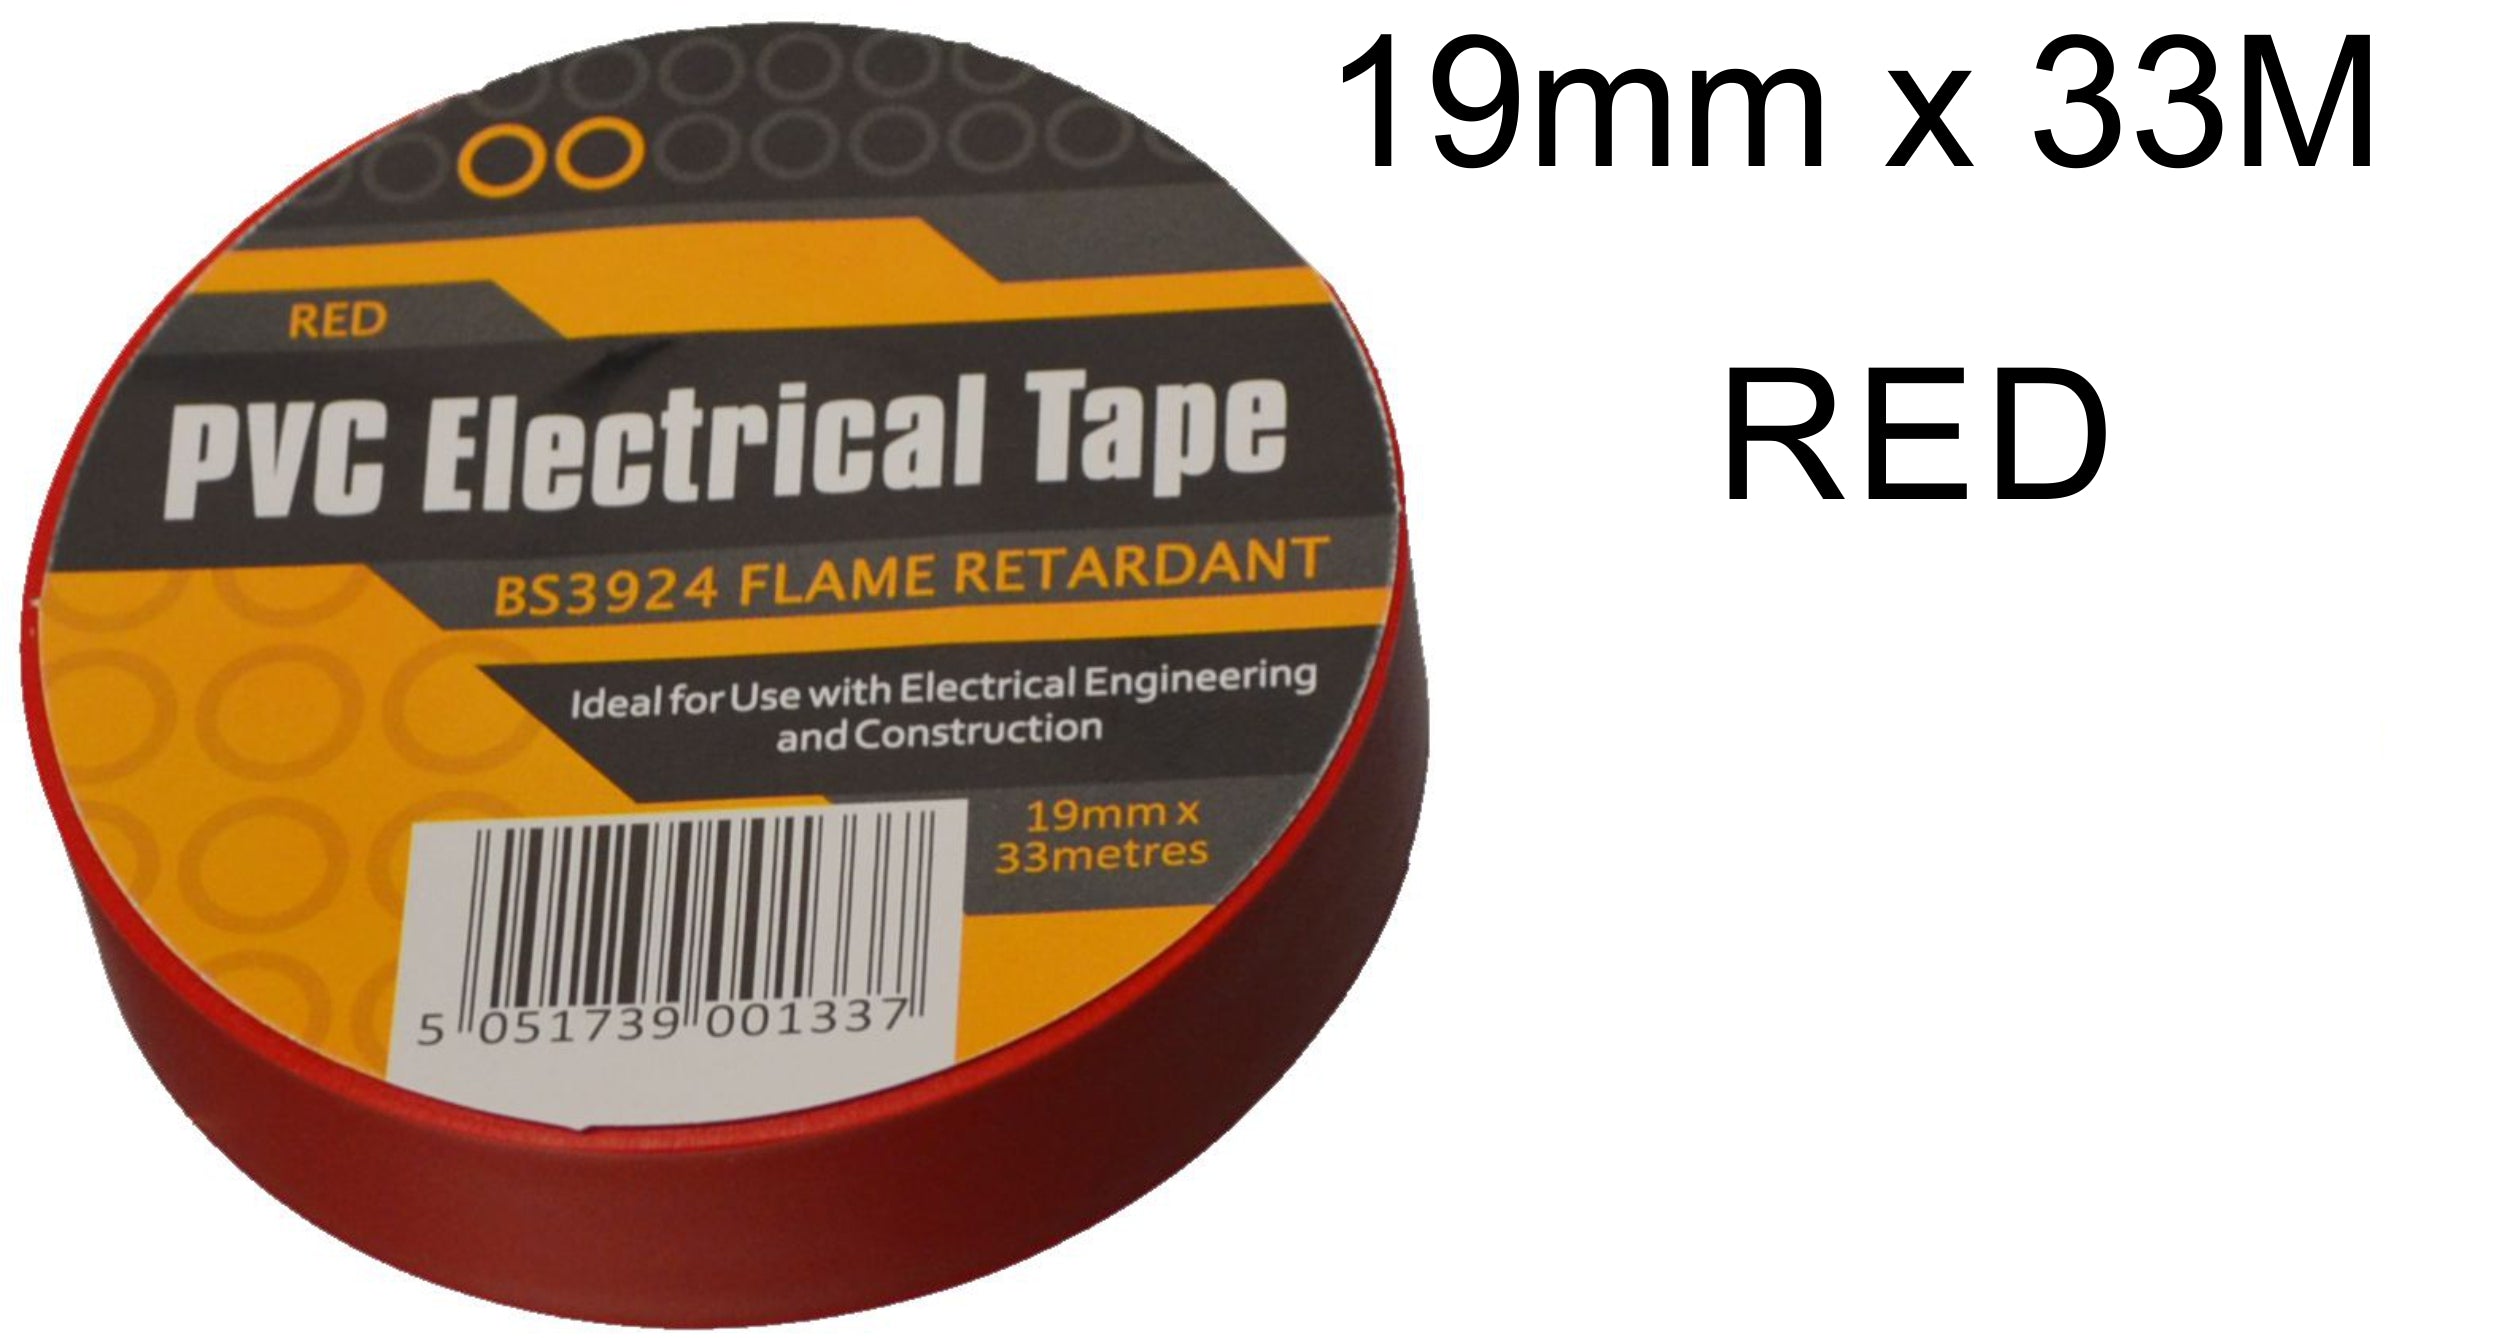 19mm x 33M Red PVC Electrical Tape